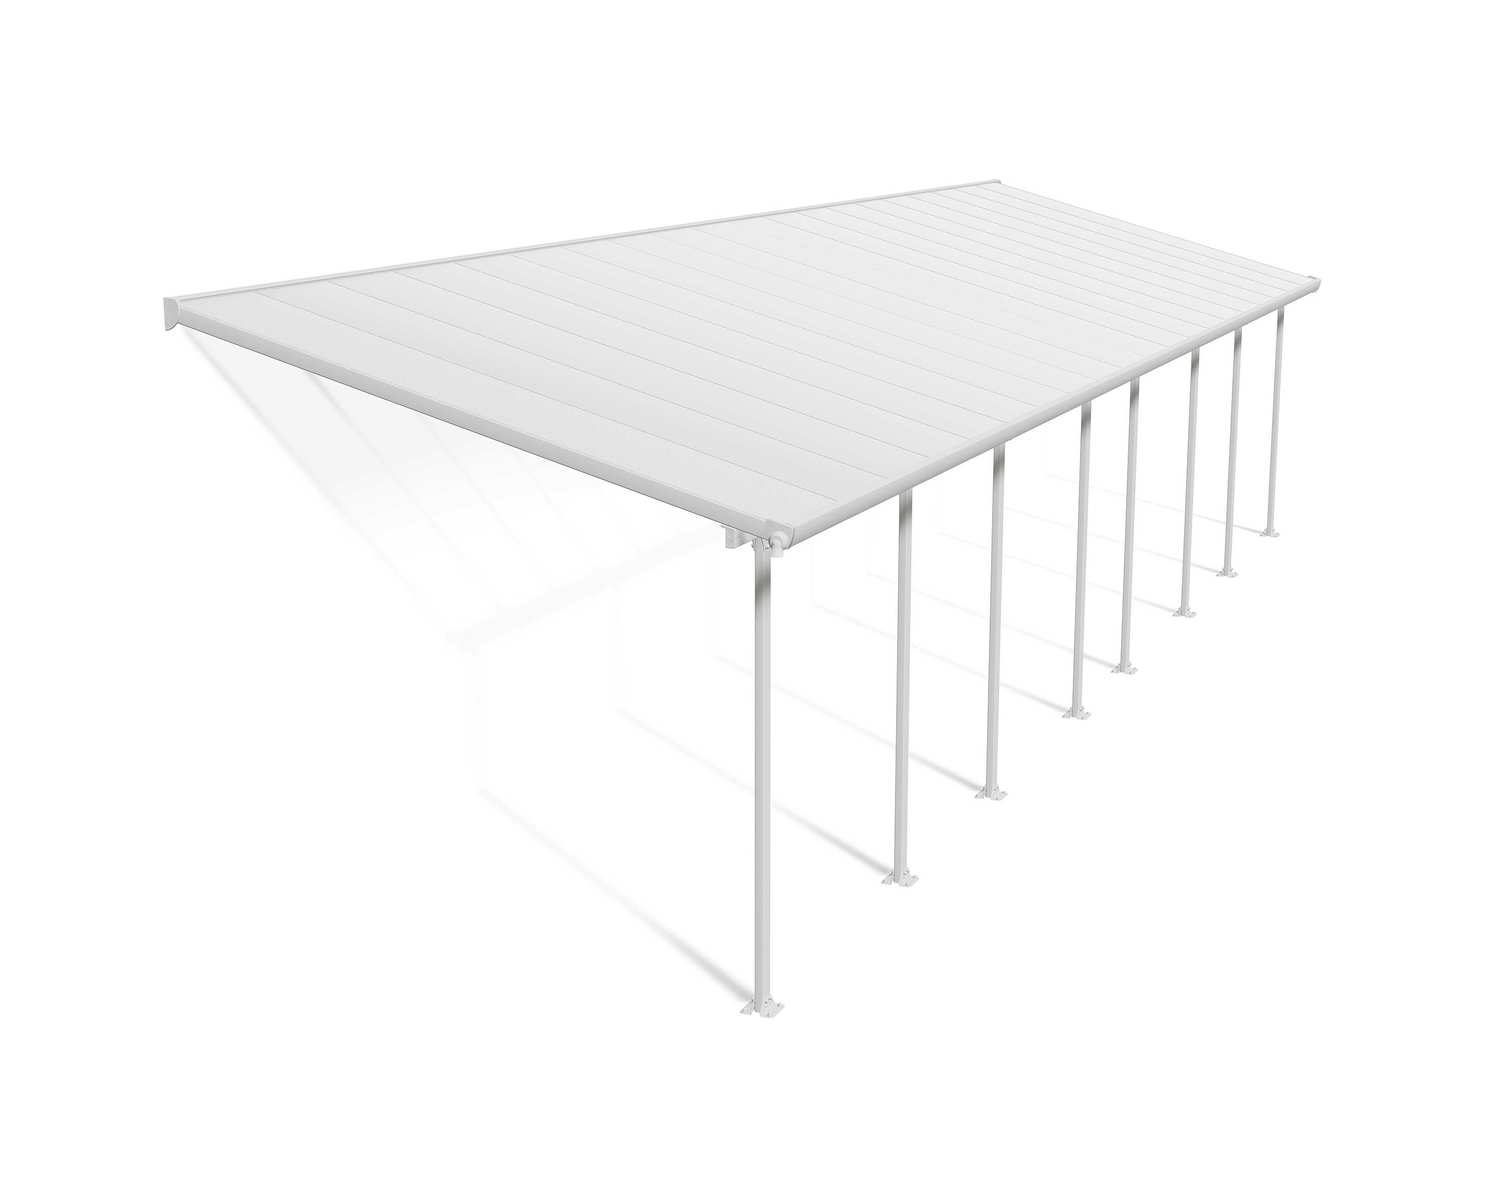 Feria 10 ft. x 36 ft. White Aluminium Patio Cover With 8 Posts, White Twin-Wall Polycarbonate Roof Panels.